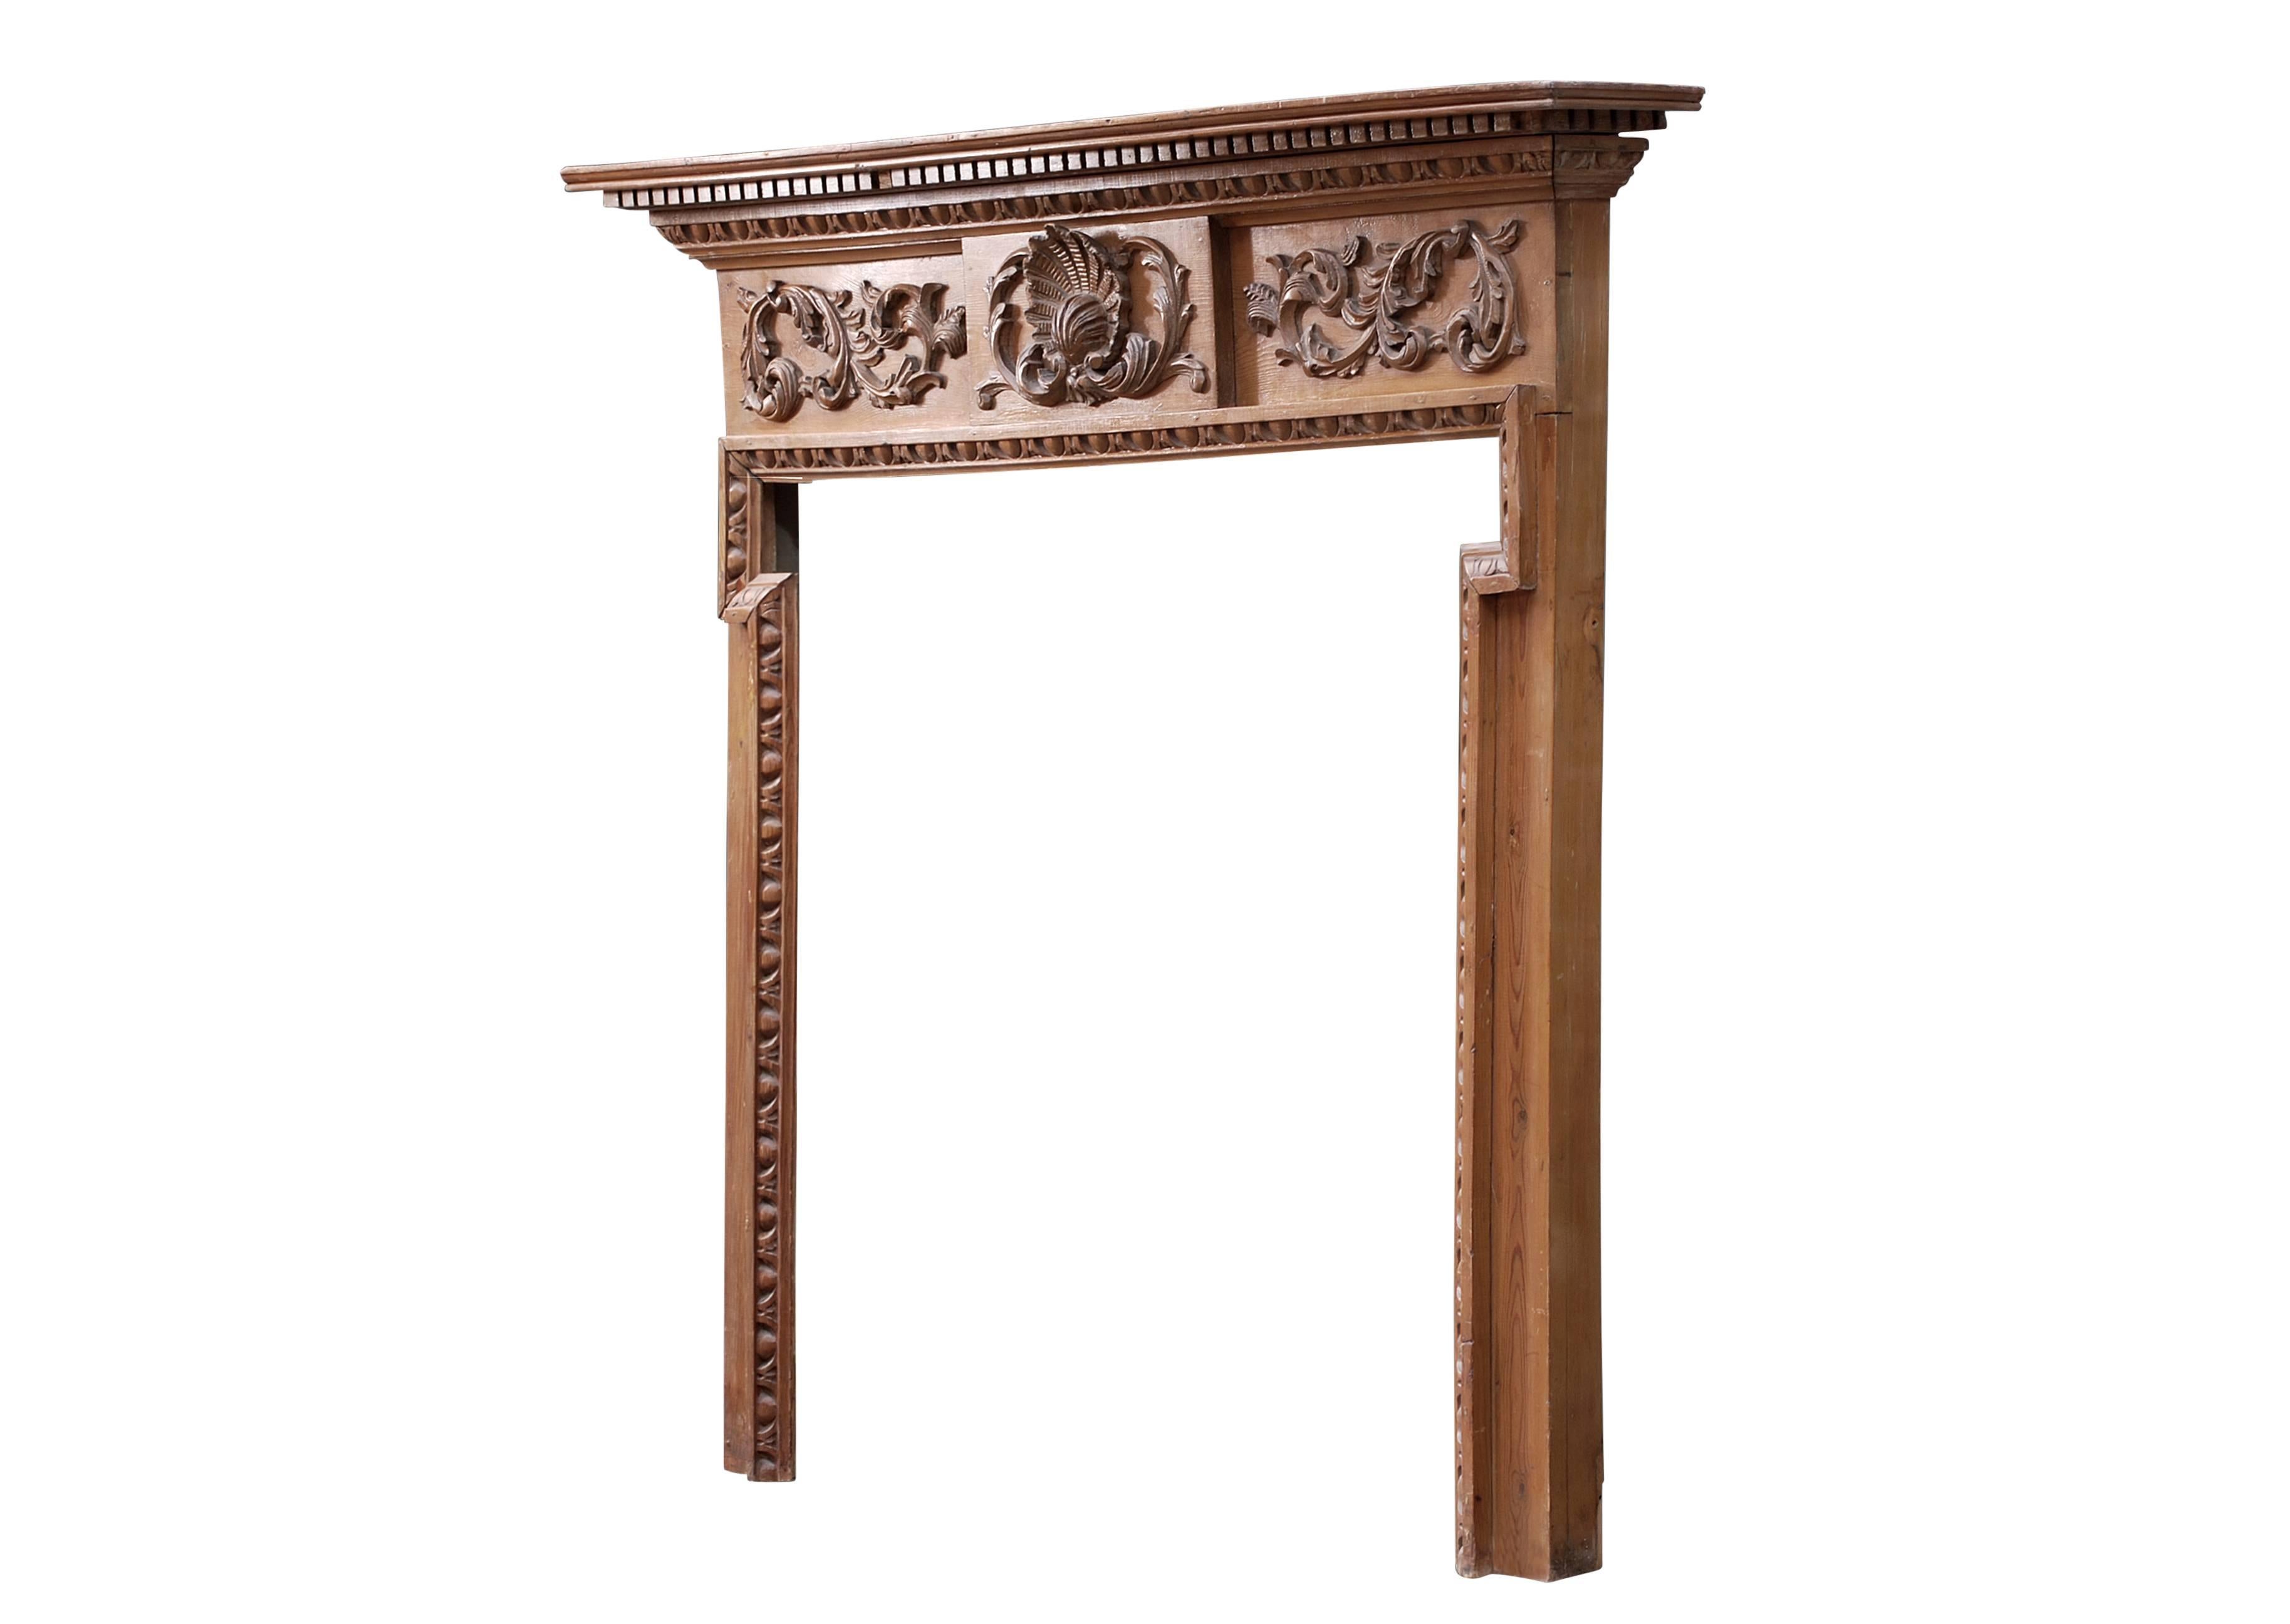 An English carved pine fireplace. The frieze with carved foliage and shell to centre, the jambs with egg-and-tongue moulding to inside, the shelf with matching egg-and-tongue moulding surmounted by dentils, 2th century. (Could be stained to any